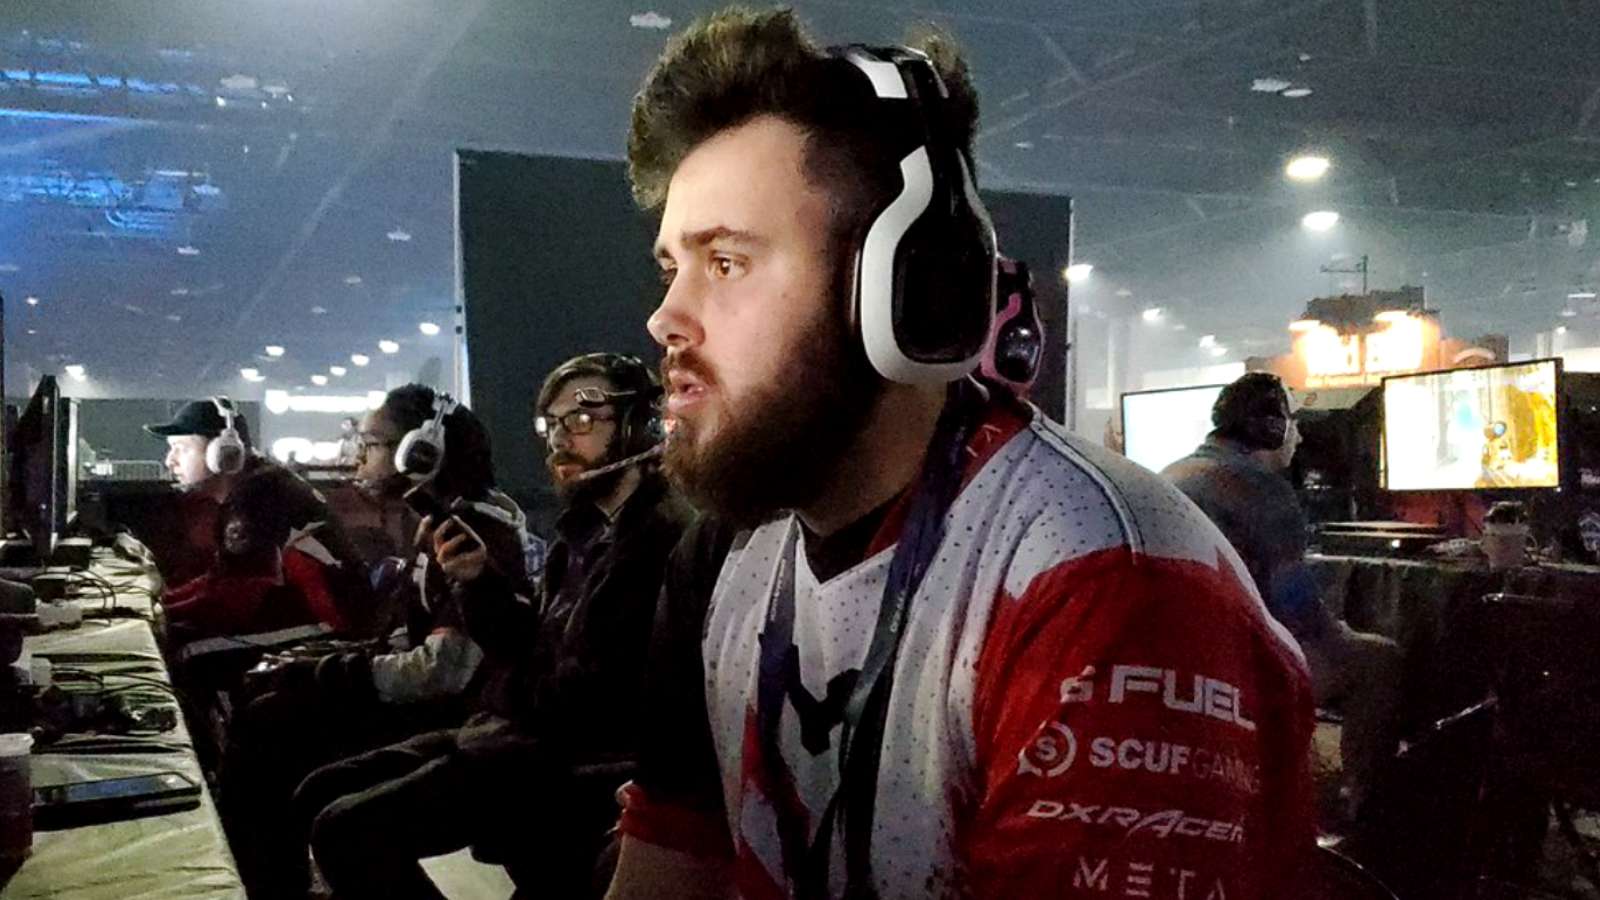 Halo player playing at tournament with headset on